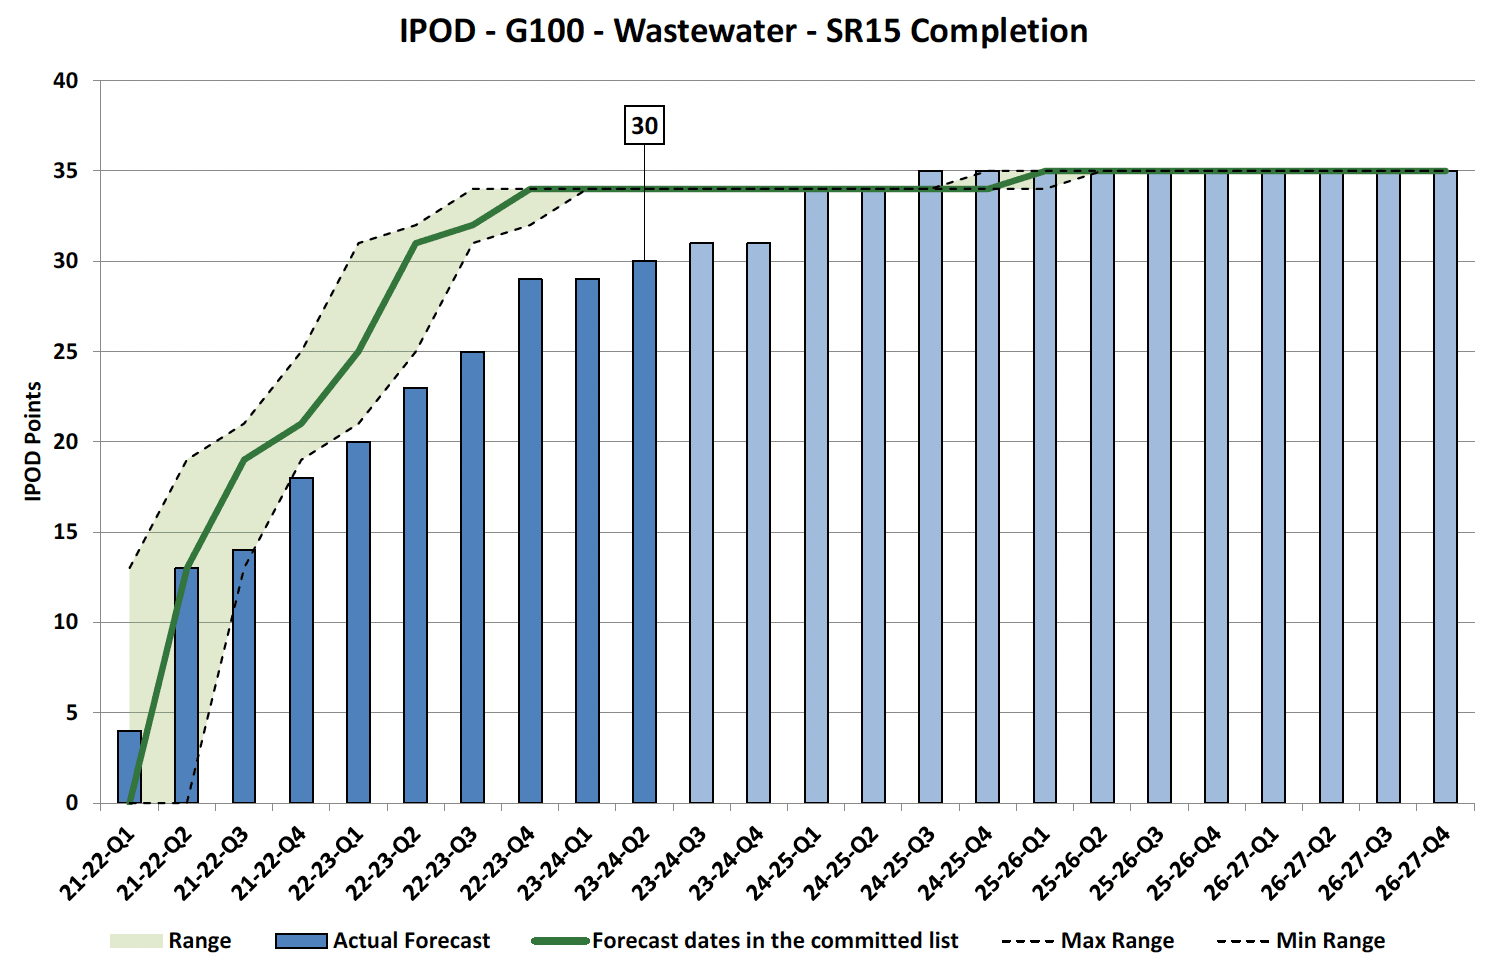 Chart showing IPOD points achieved or forecast for Project Acceptance milestone against target range for SR15 Completion Projects in Wastewater Portfolio